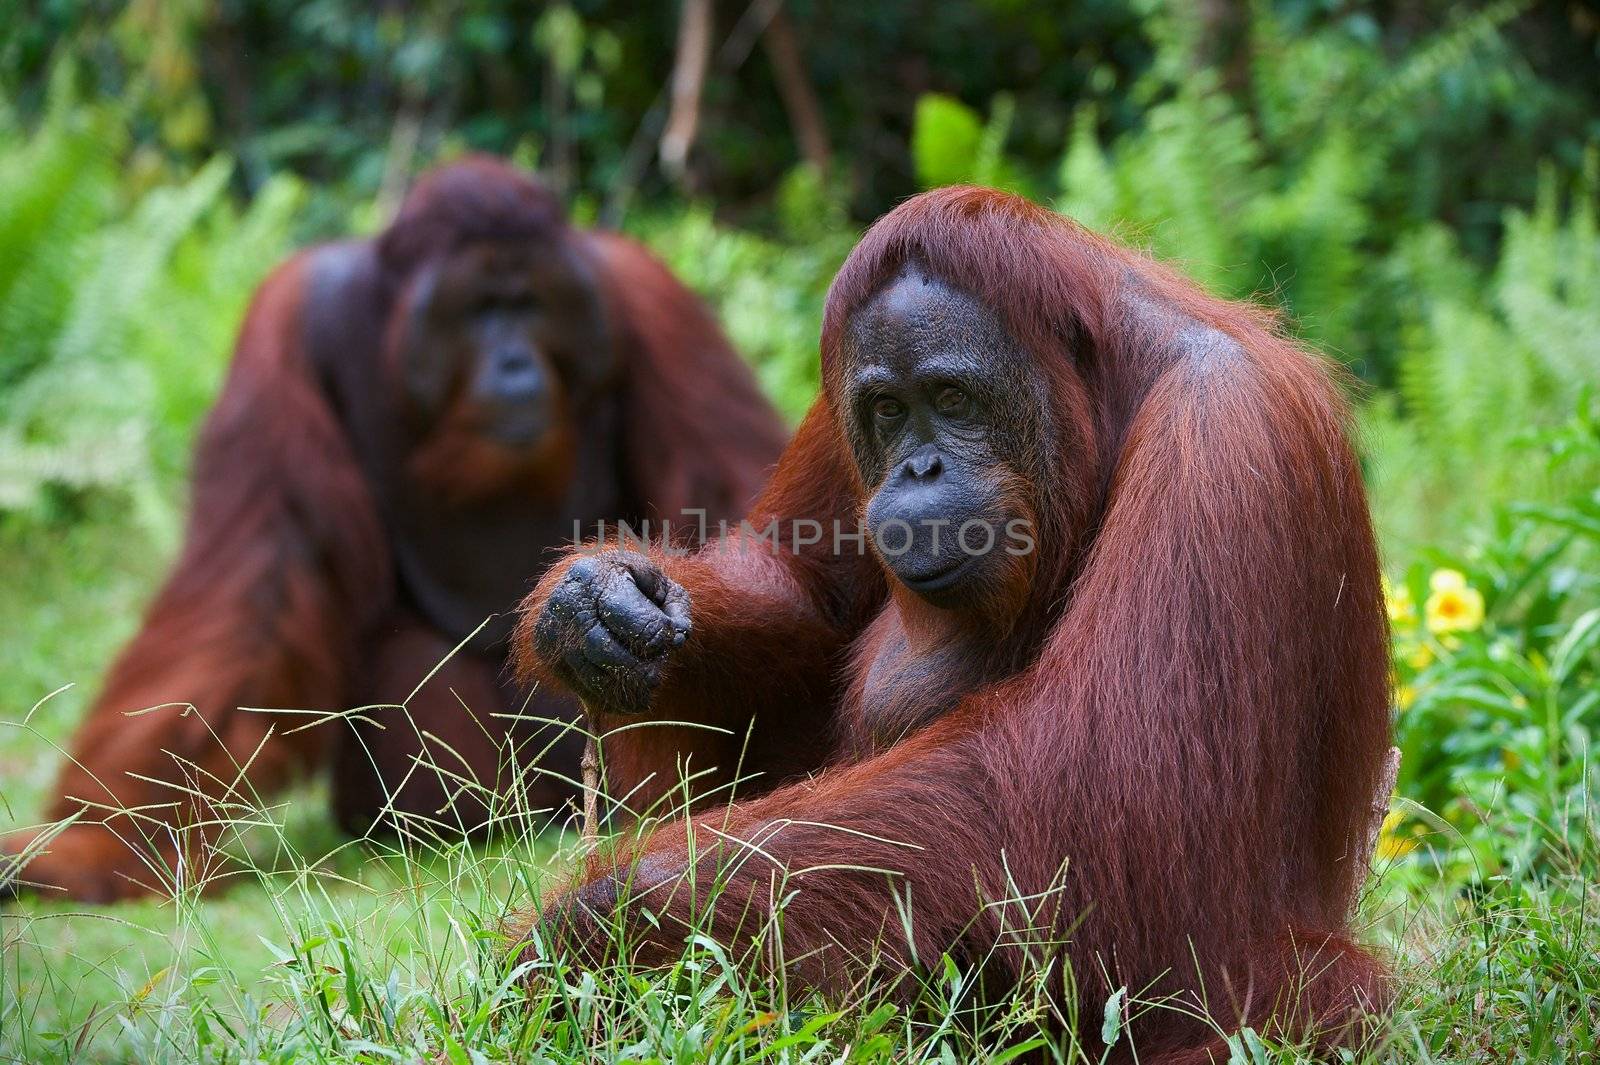 Orangutan adult female./Two orangutans sit on a green lawn and the female attentively looks. Indonesia. Borneo.